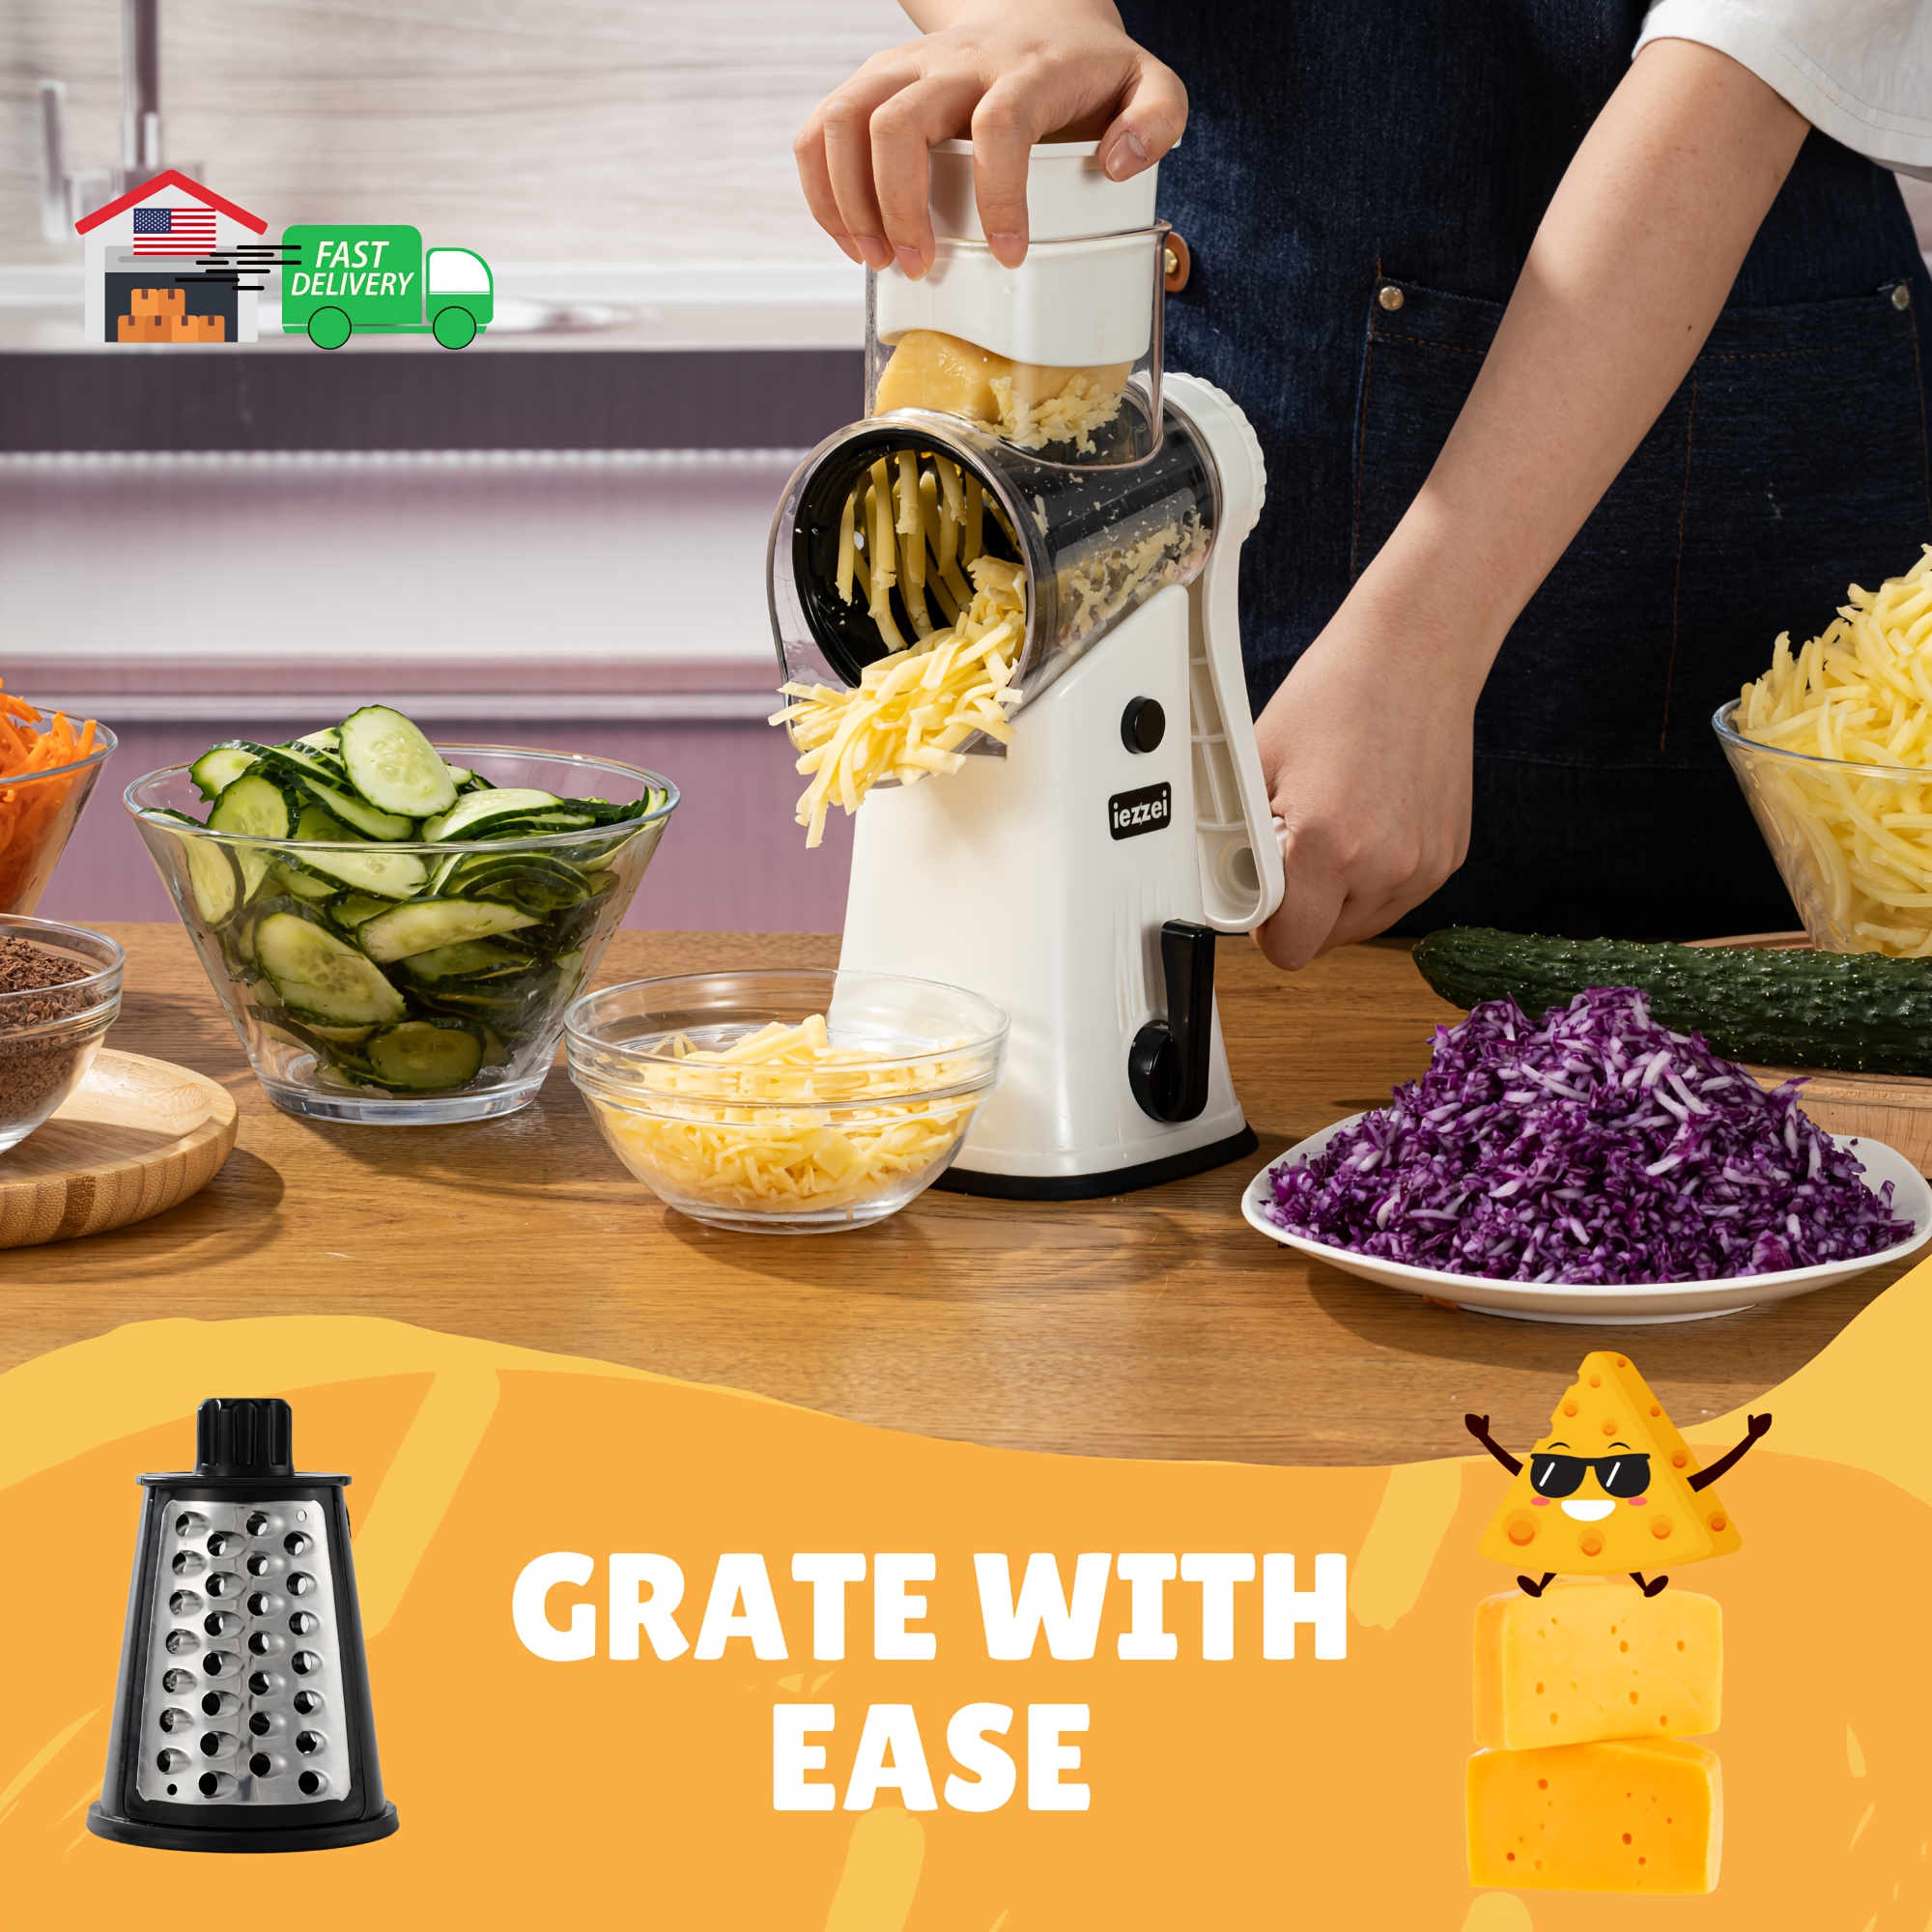 

Rotary Cheese Grater Hand Crank - Vegetable Slicer With 5 Stainless Steel Blades & , Carrot , Crinkle Cutter, Fruit Slicer, Salad Shooter Large & Safe Suction Base With Handle